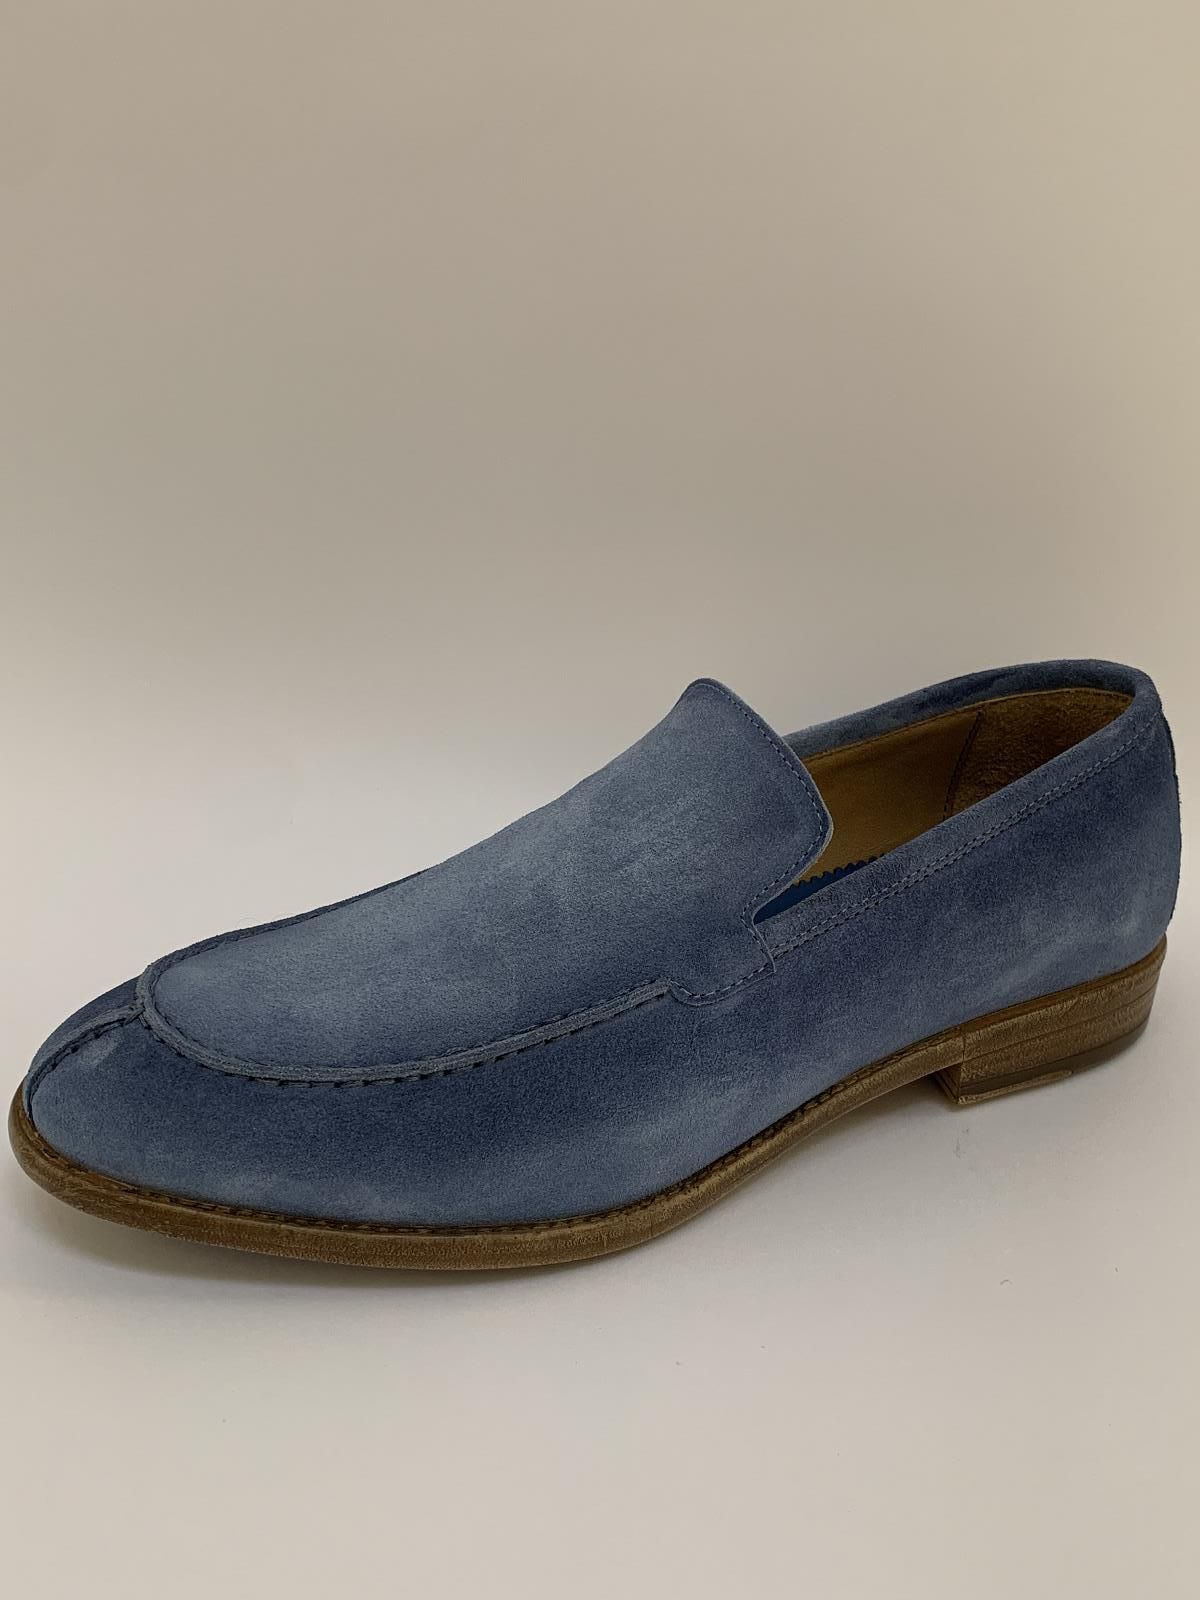 Giorgio Moccasin Blauw jeans heren (Mocca Used Blue - 8970801) - Schoenen Luca